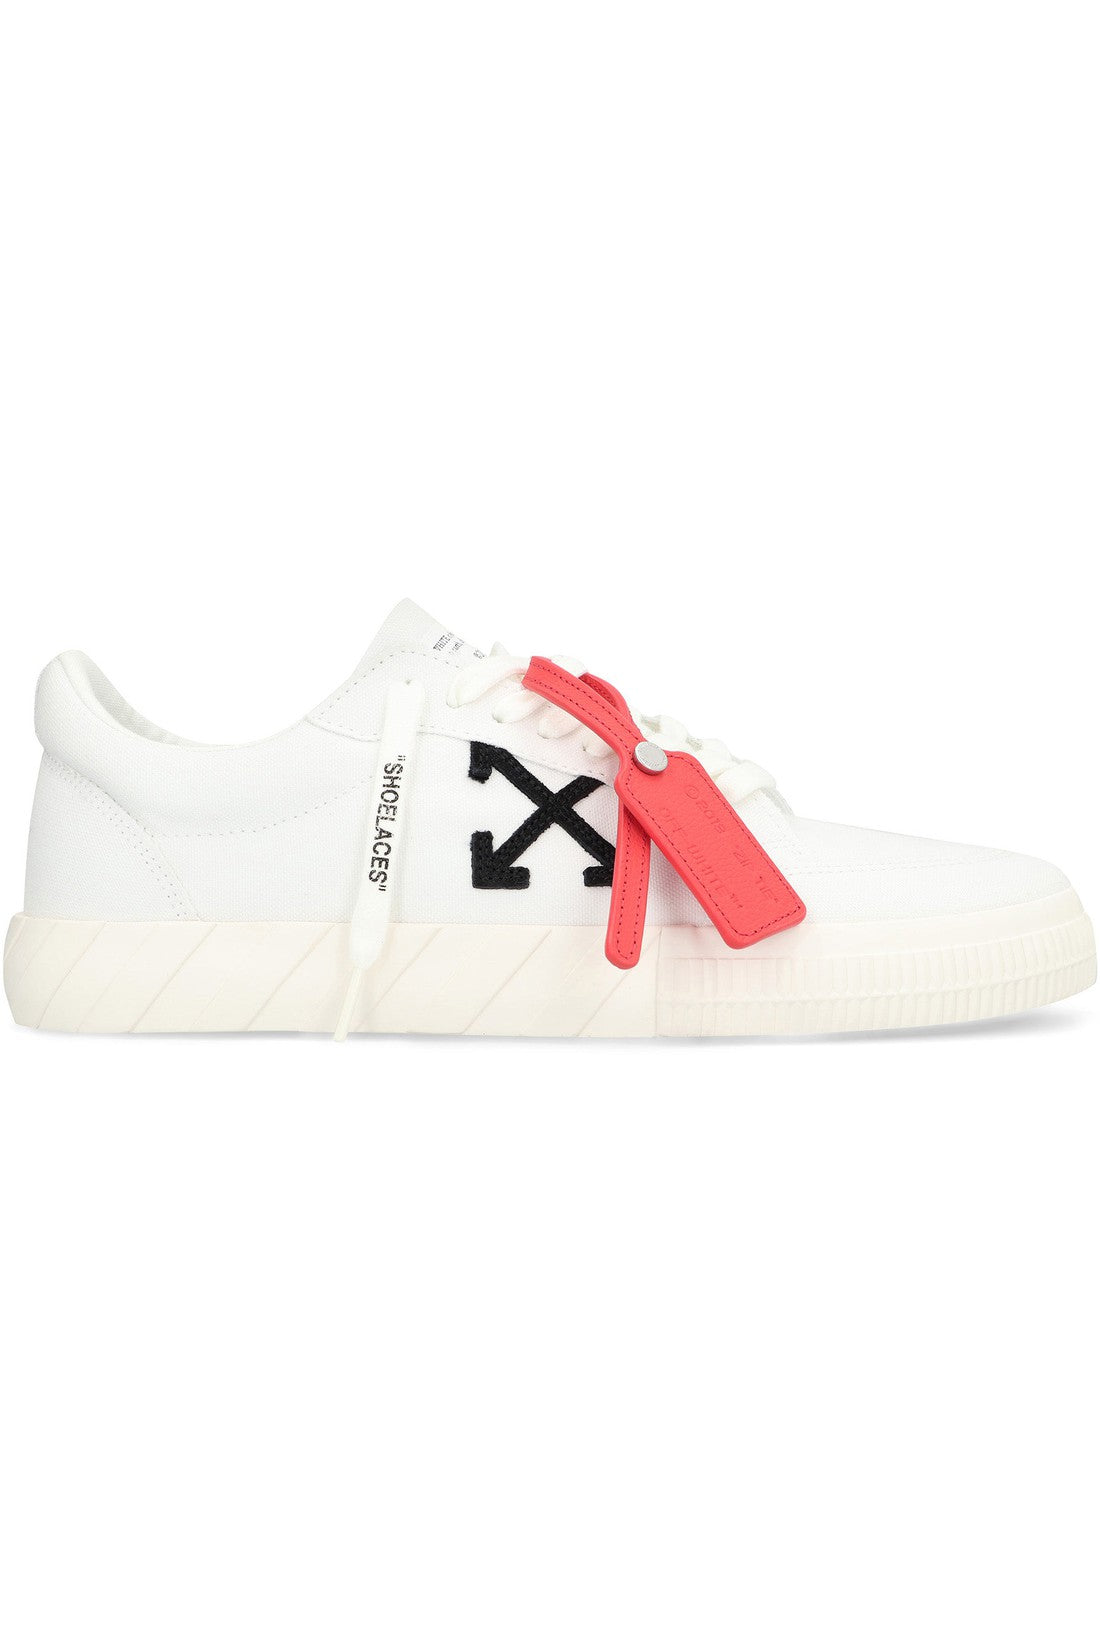 Off-White-OUTLET-SALE-Vulcanized Fabric low-top sneakers-ARCHIVIST